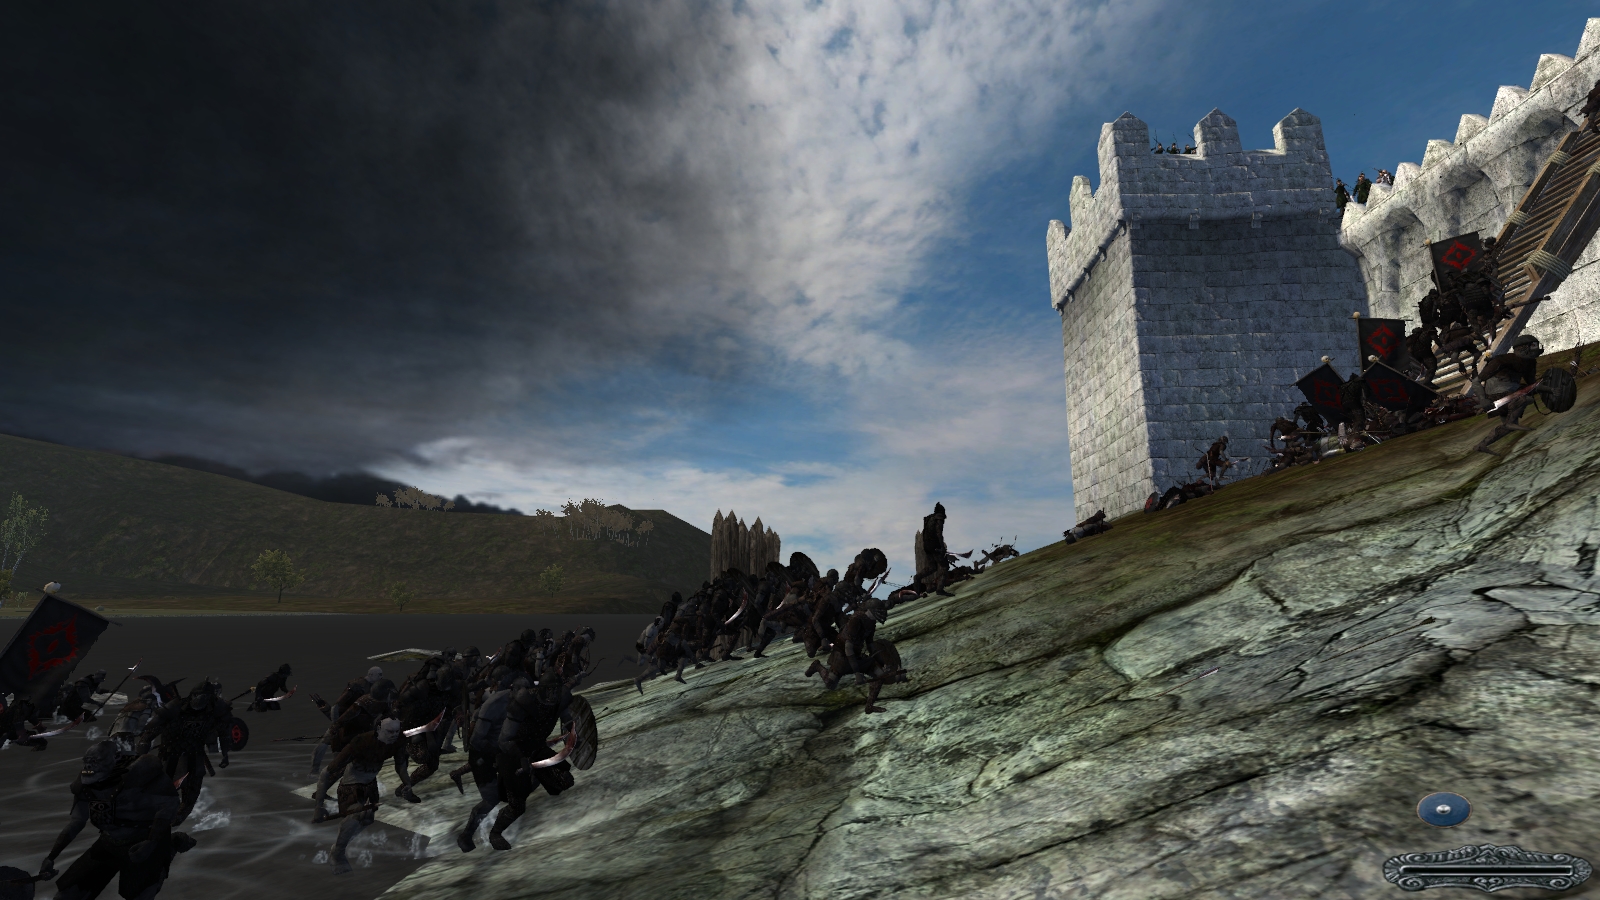 Last days warband. Mount & Blade: Warband - the last Days (of the third age of Middle Earth). Mount and Blade Warband the last Days of the third age. Mount Blade Властелин колец. Mount and Blade Средиземье.